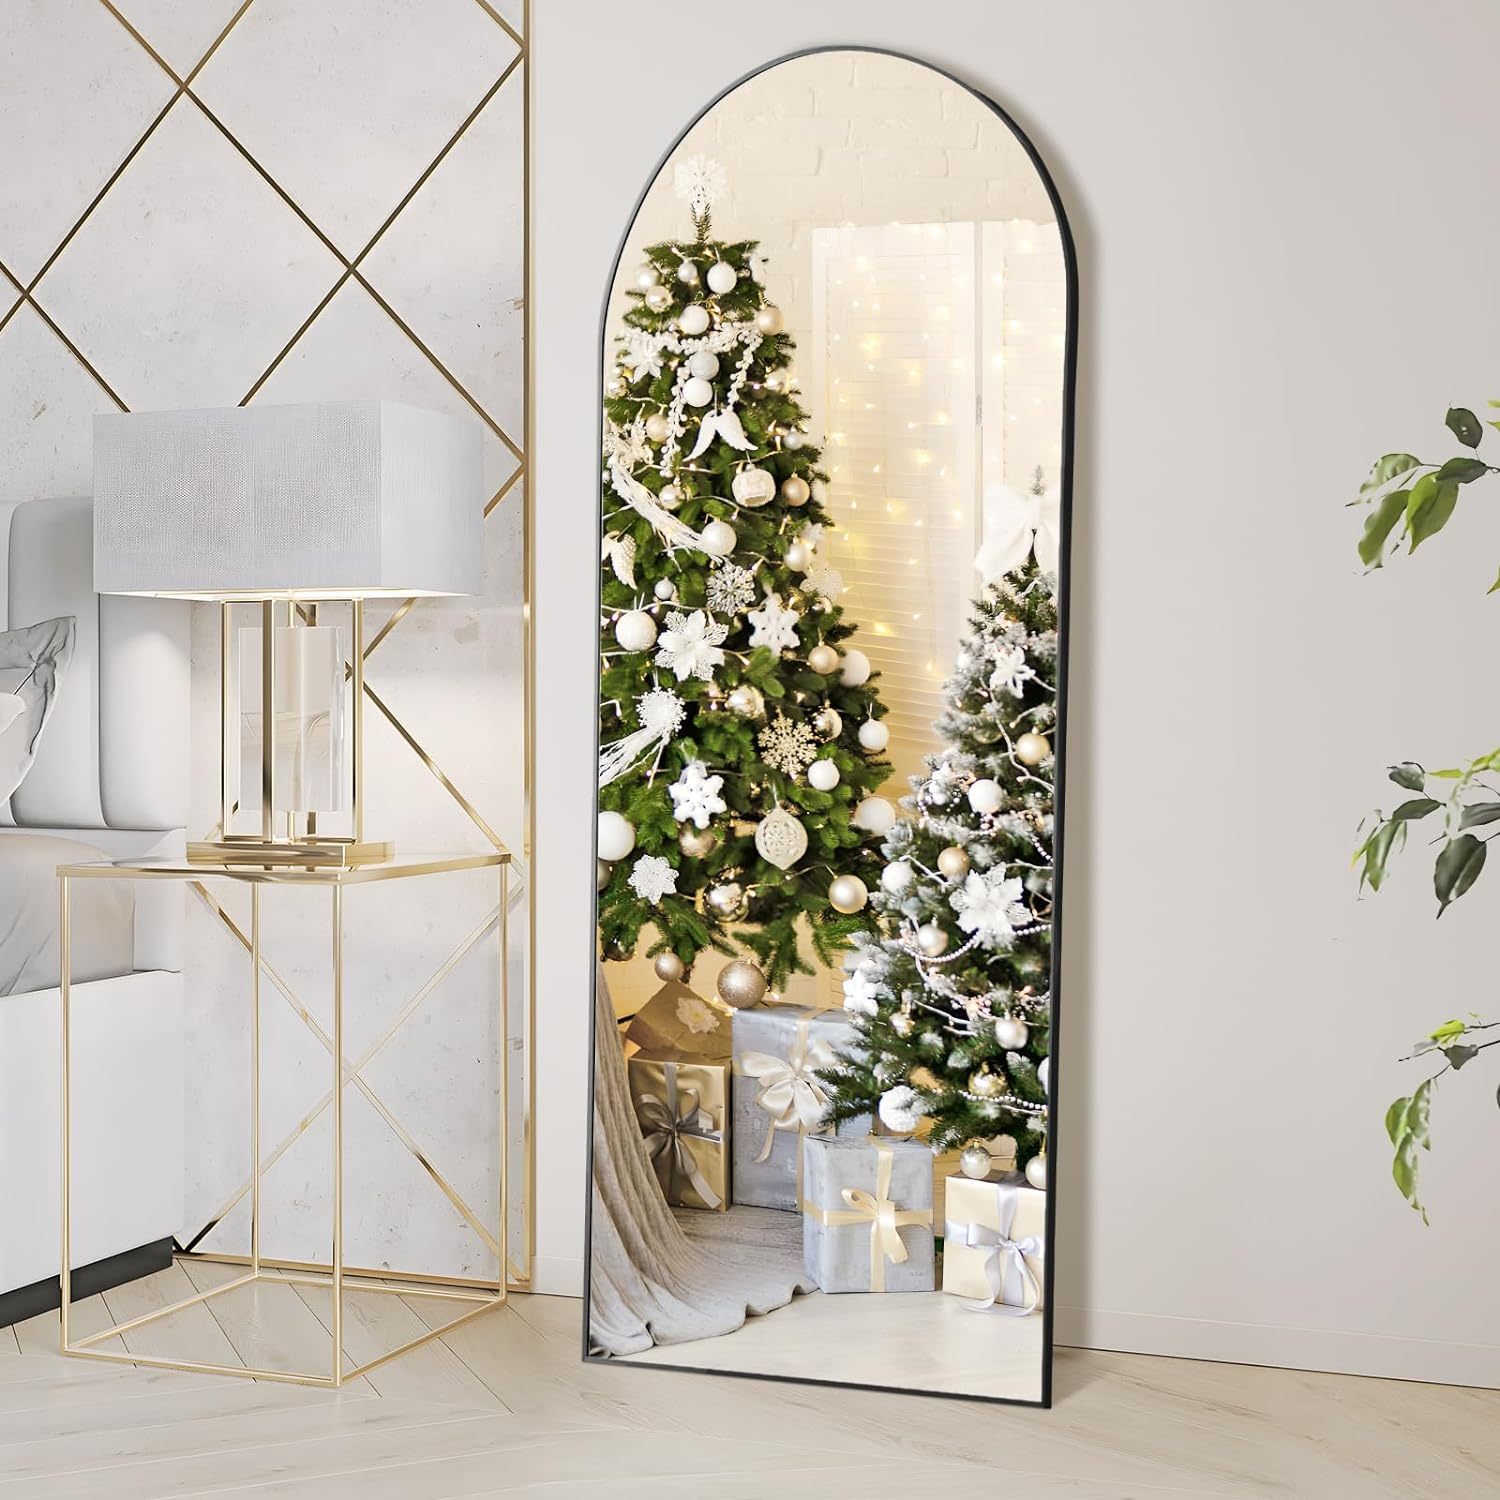 

Dumos 64"x21" Arched Full Length Mirror With Stand, Floor Mirror With Aluminum Alloy Frame For Bedroom, Standing Full Body Mirror With Shatter-proof Nano Glass For Wall, Living Room, Cloakroom